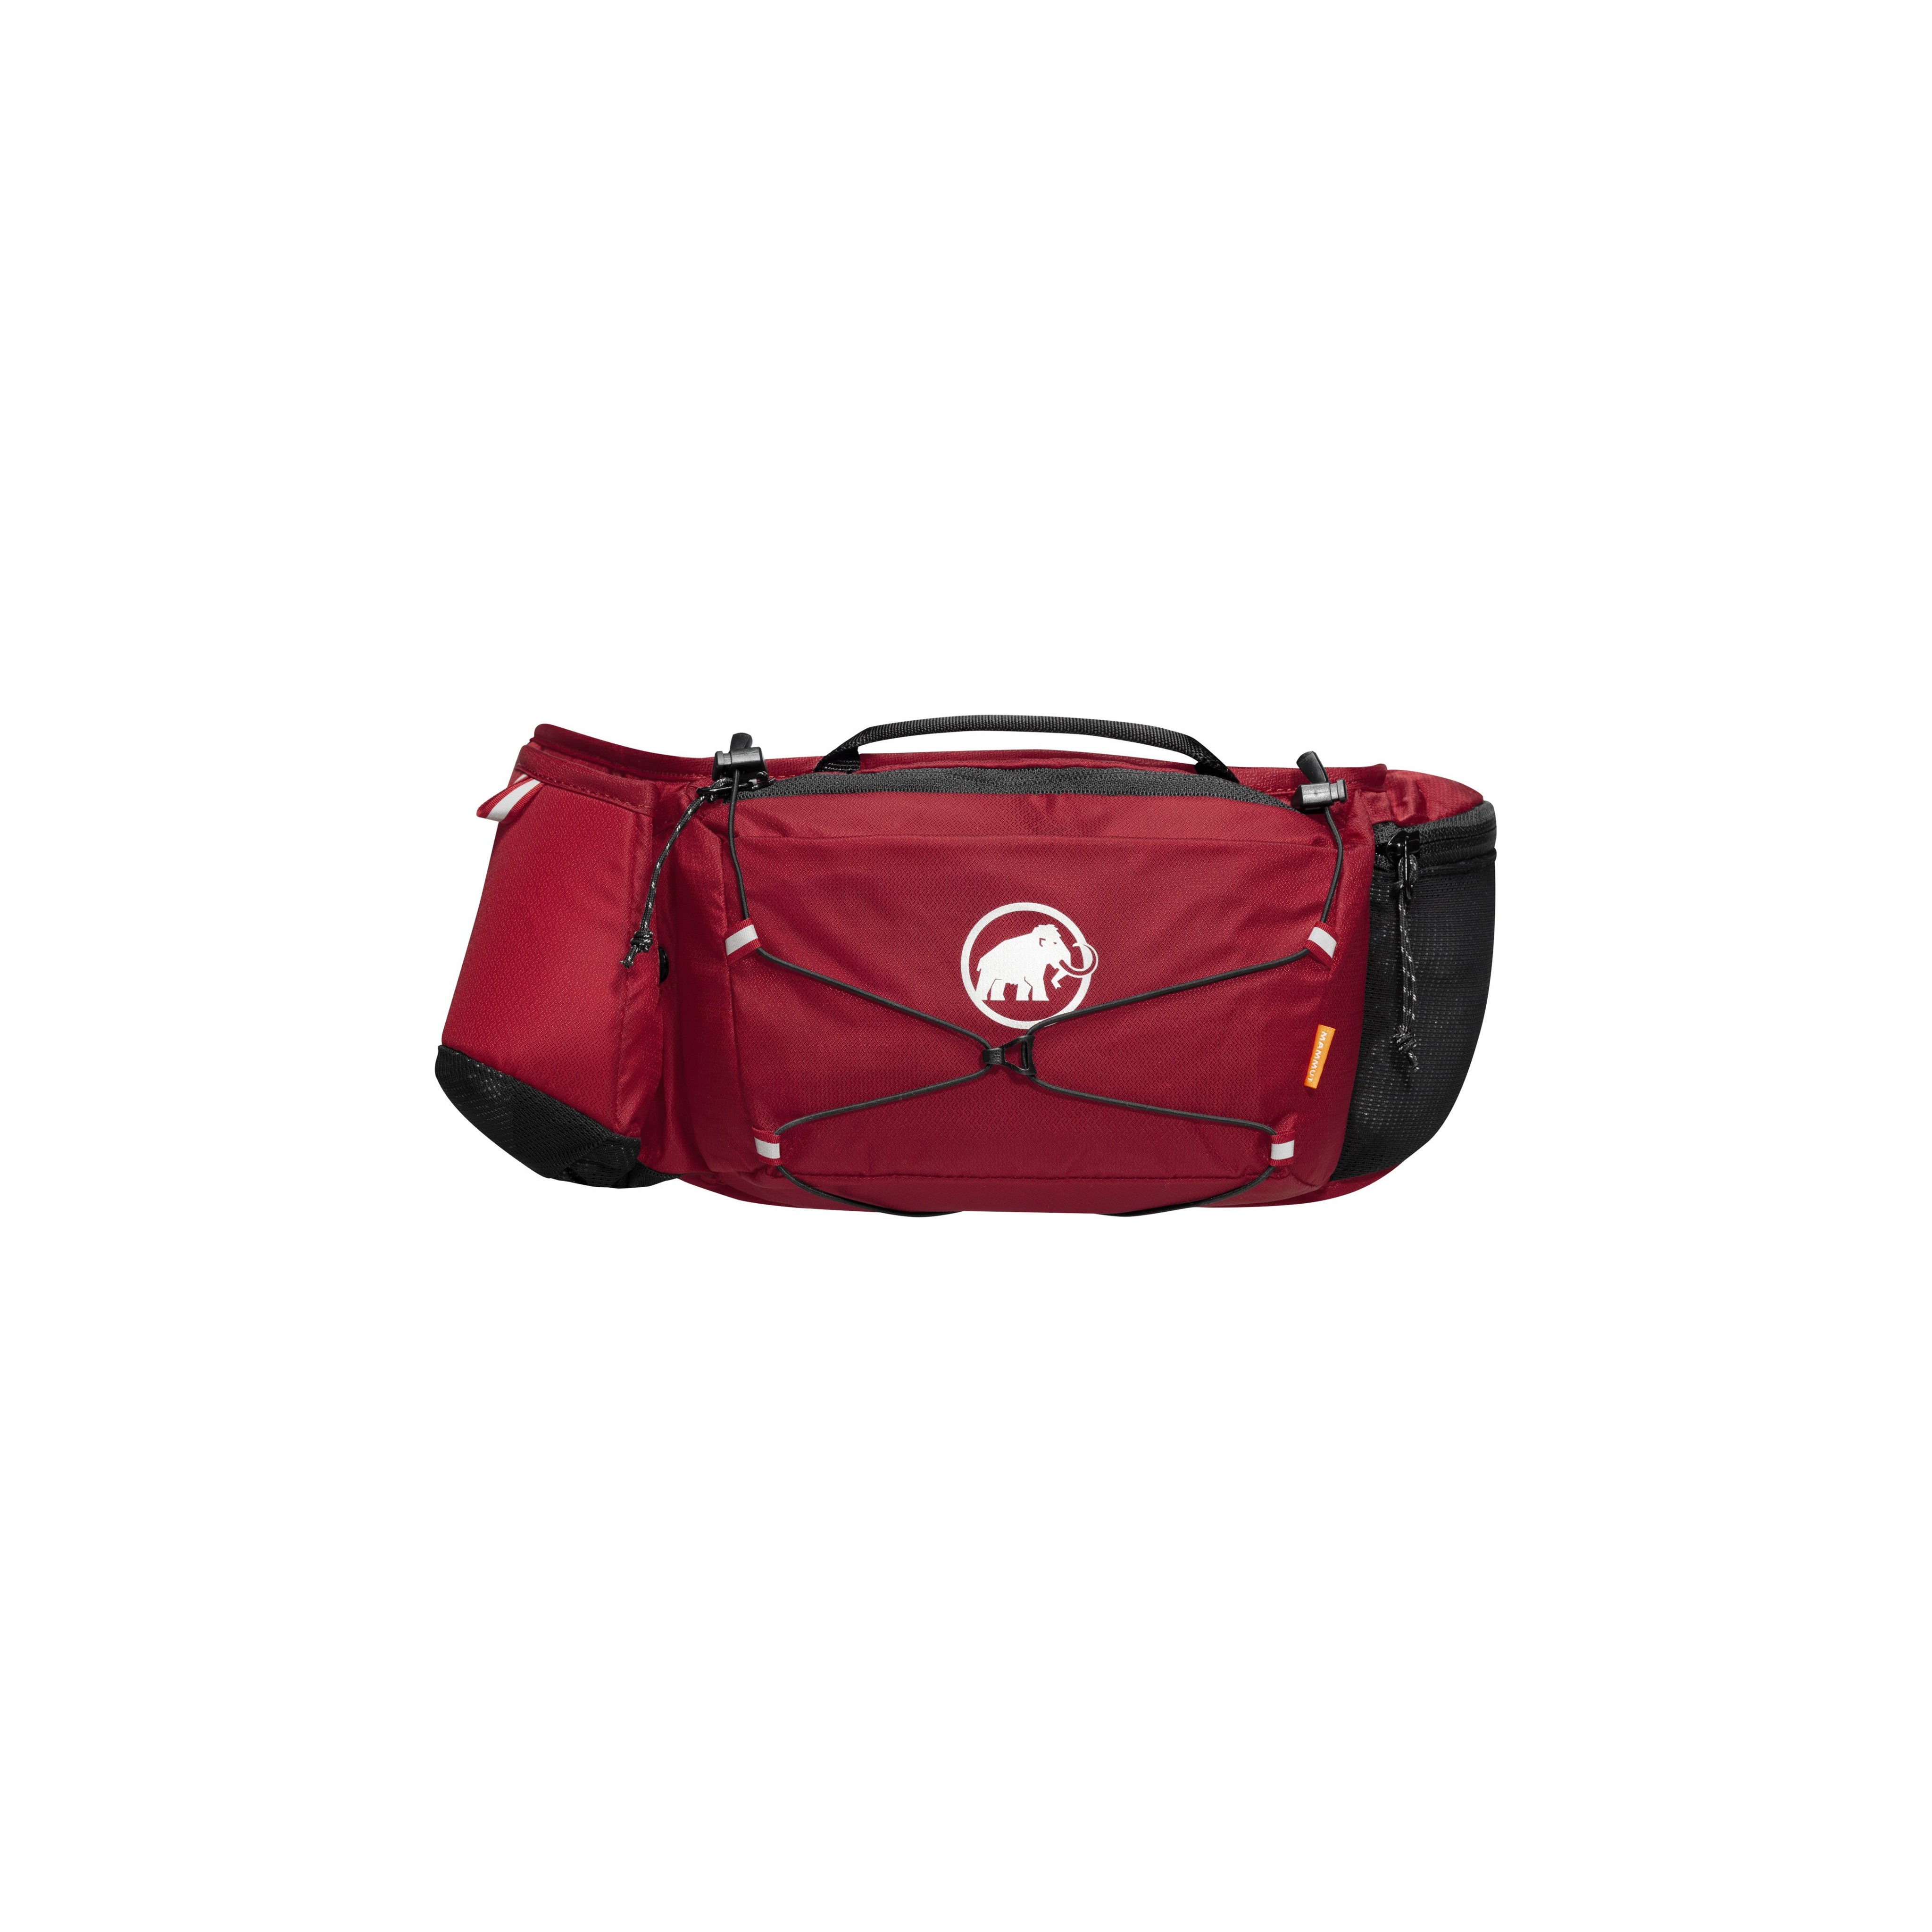 Lithium Waistpack - blood red, 3 L product image